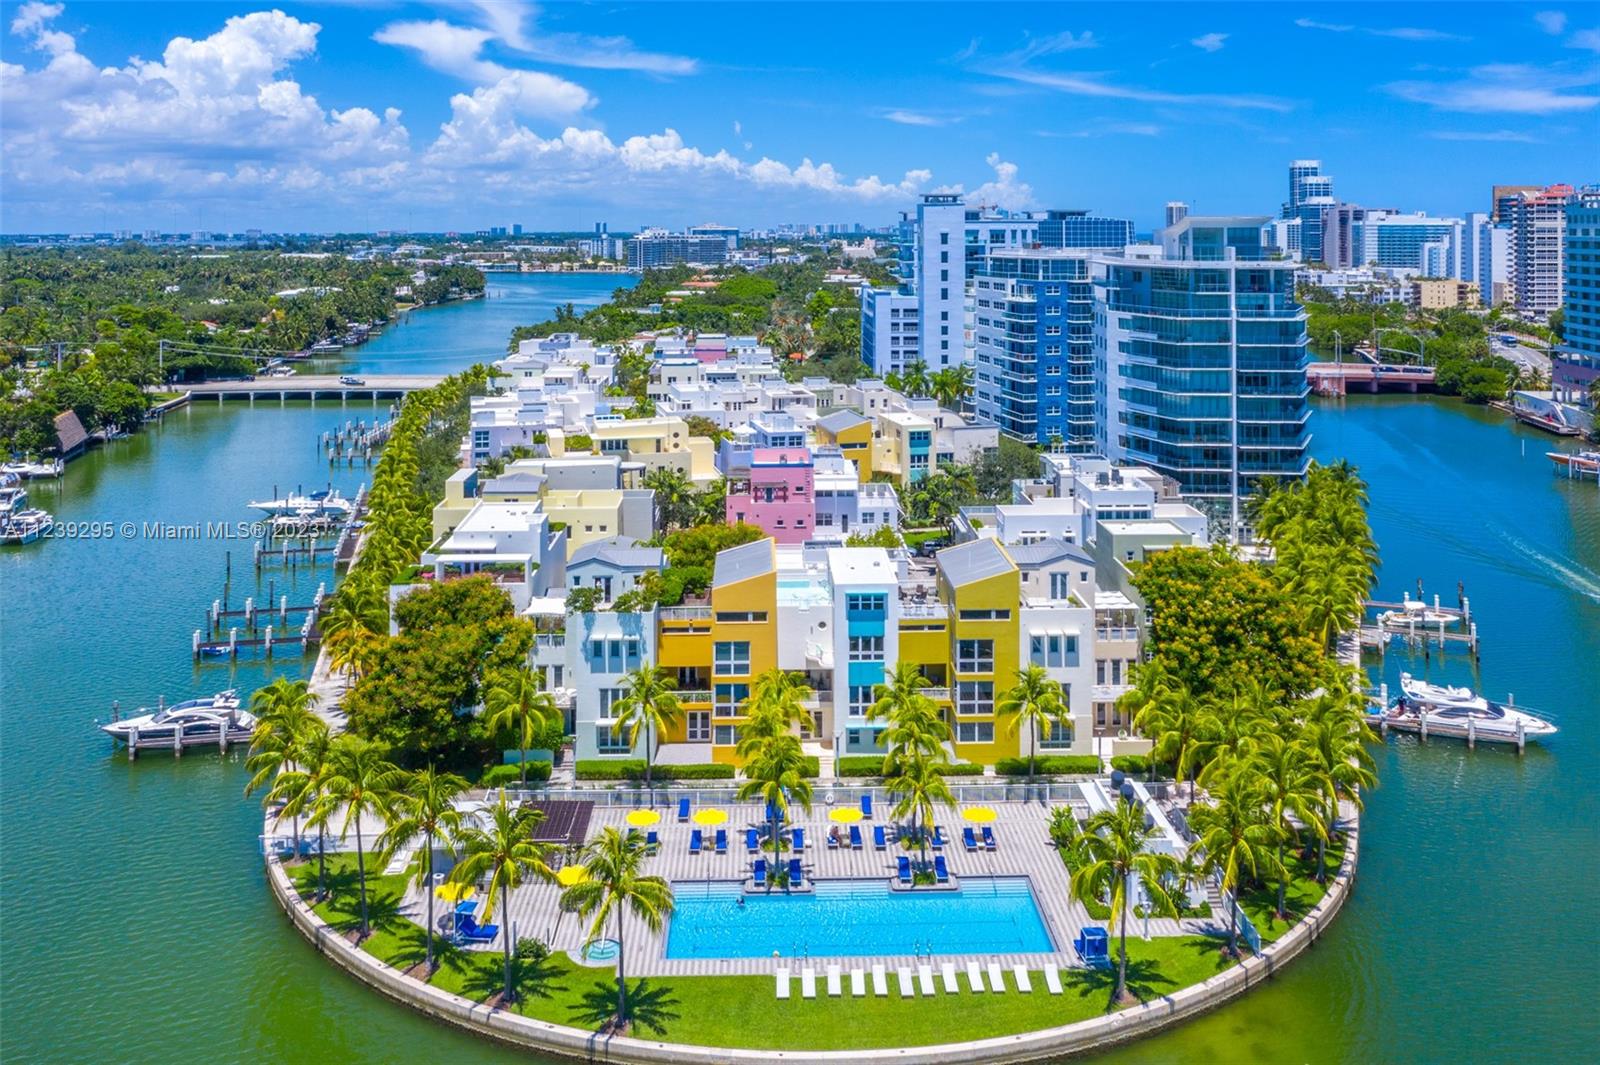 Situated within the lush Aqua community on Allison Island, this waterfront condo offers an elegant reprieve from the hustle and bustle of Miami Beach. The spacious 4 bed/3.5 bath unit offers Bulthaup kitchen, subzero refrigerator, Miele & Wolf appliances, and custom oversized kitchen island with plenty of storage. Enjoy breathtaking views of the ocean, intracoastal, La Gorce Golf Course, and Miami skyline from floor-to-ceiling windows throughout. Enjoy fresh air in any of the two expansive terraces with over 2300 sf of outdoor space. The 8.5-acre private island is close to fine dining and shopping and offers luxury amenities including two pools, jacuzzi, state of the art fitness center and spa, child play area, 24-hour valet and security. 4th bedroom opened and configured as a 3-bedroom.